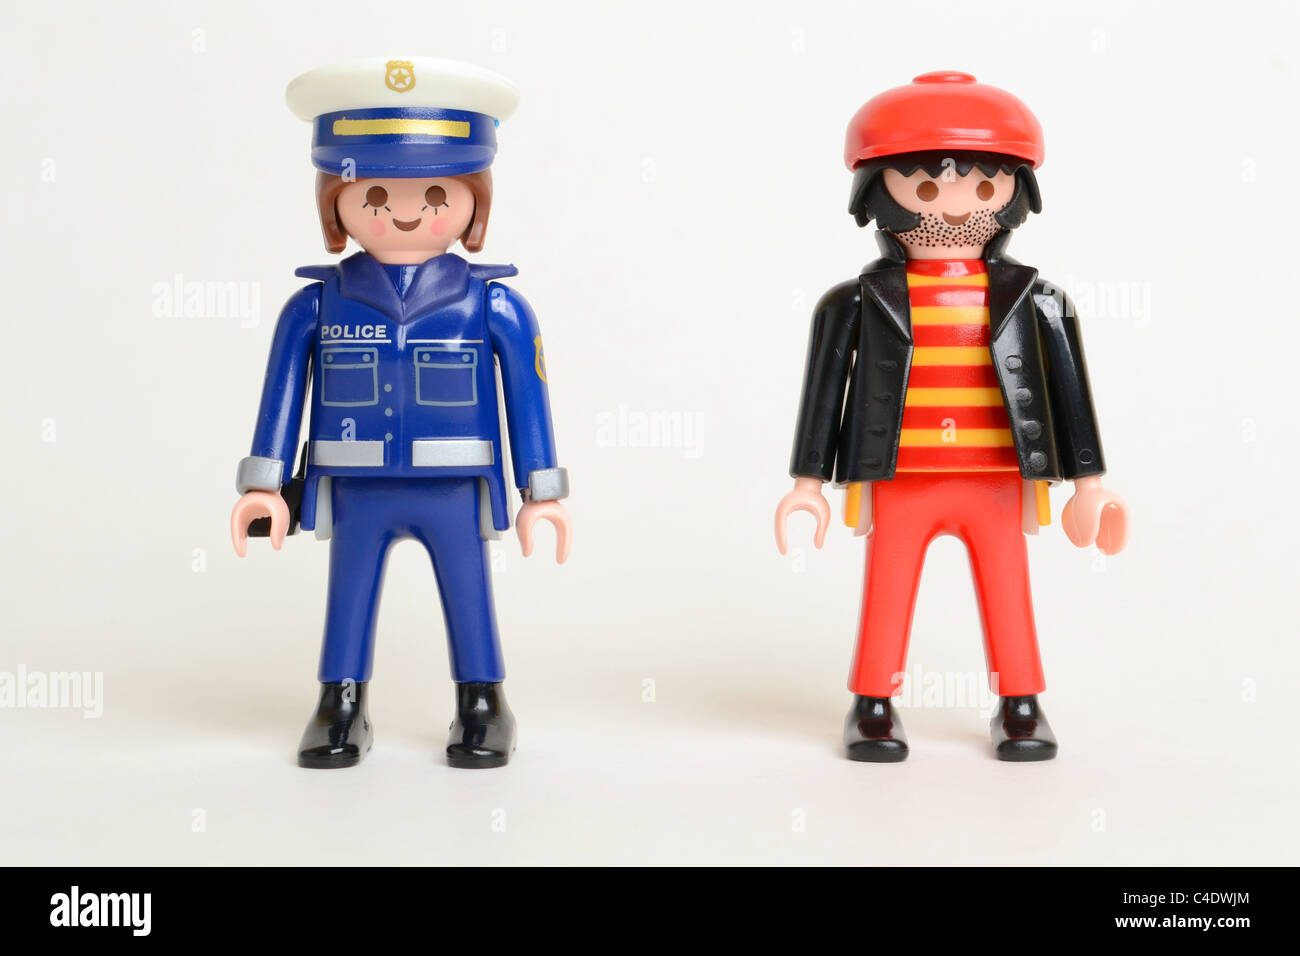 Police thief law crime opposites Police Officer Criminal uniform Playmobil Stock Photo